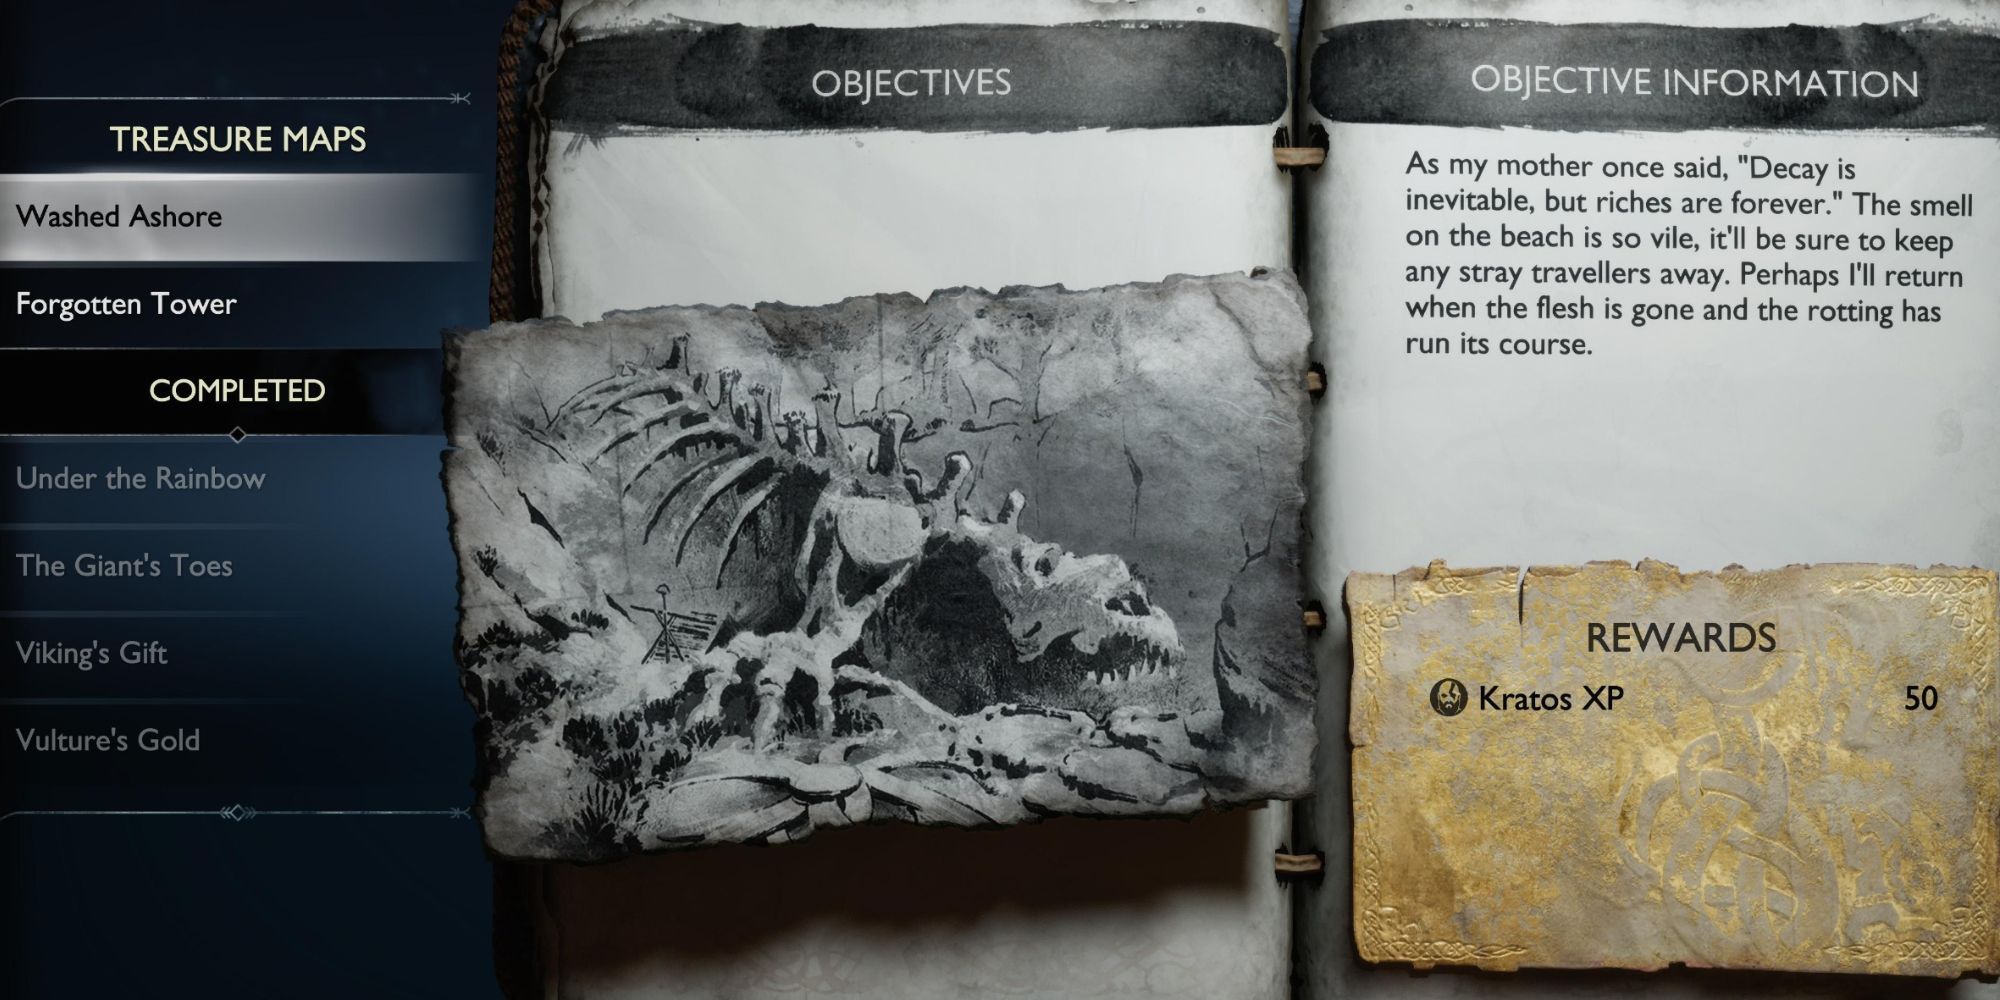 An objective screen showing one of the treasure map locations in Midgard.